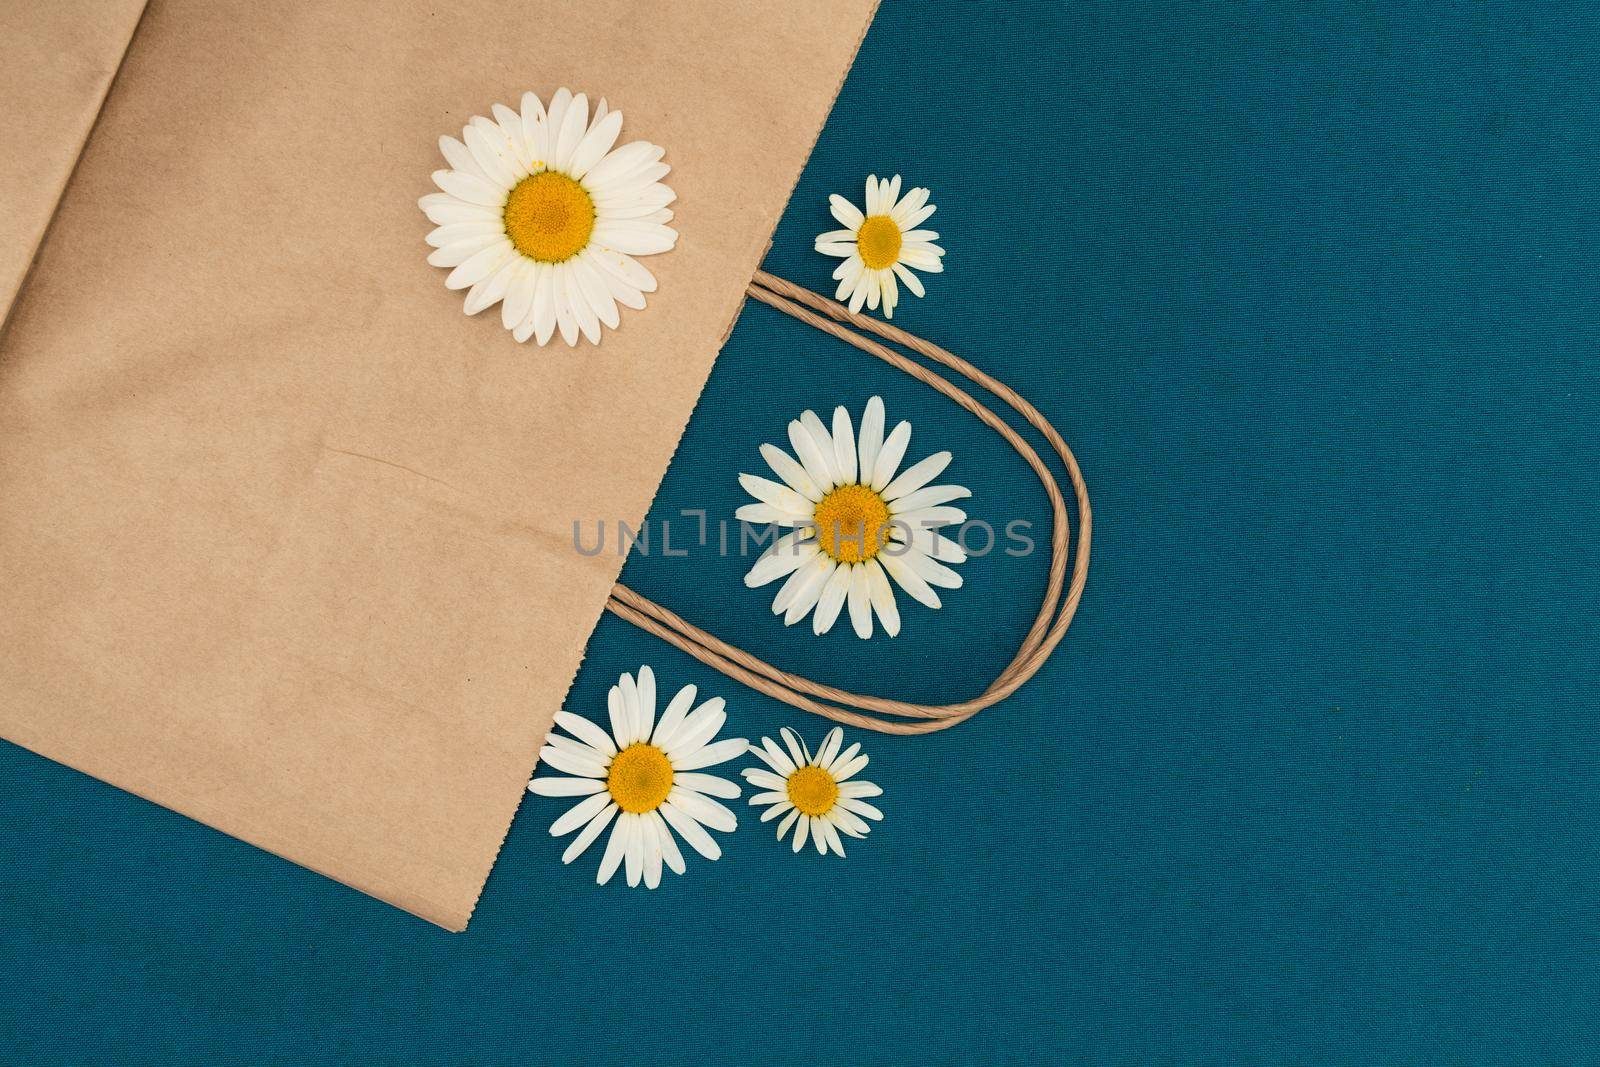 Paper bag on a blue background, decorated with daisies, brown shopping bag. Craft bag with handle. Packaging template mockup. Delivery service concept. Copy space.